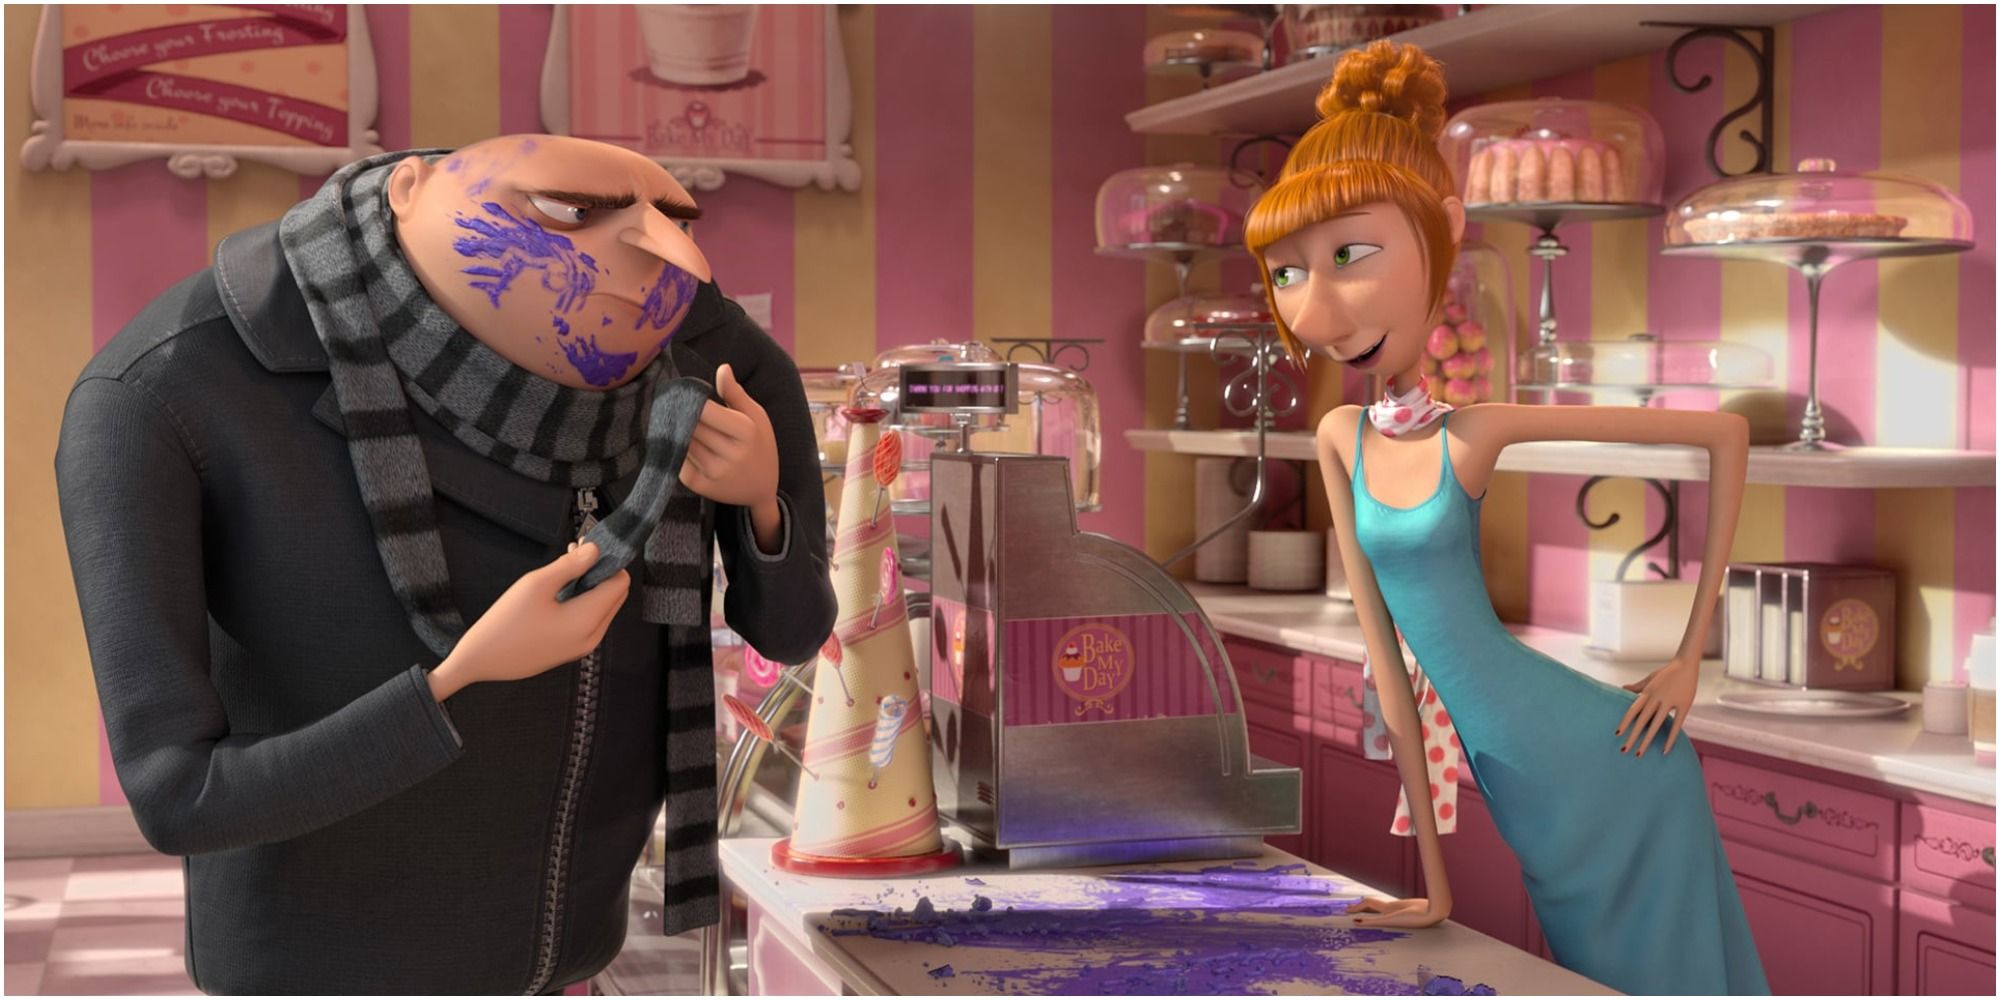 Gru covered in hand prints in a bakery in Despicable Me 2